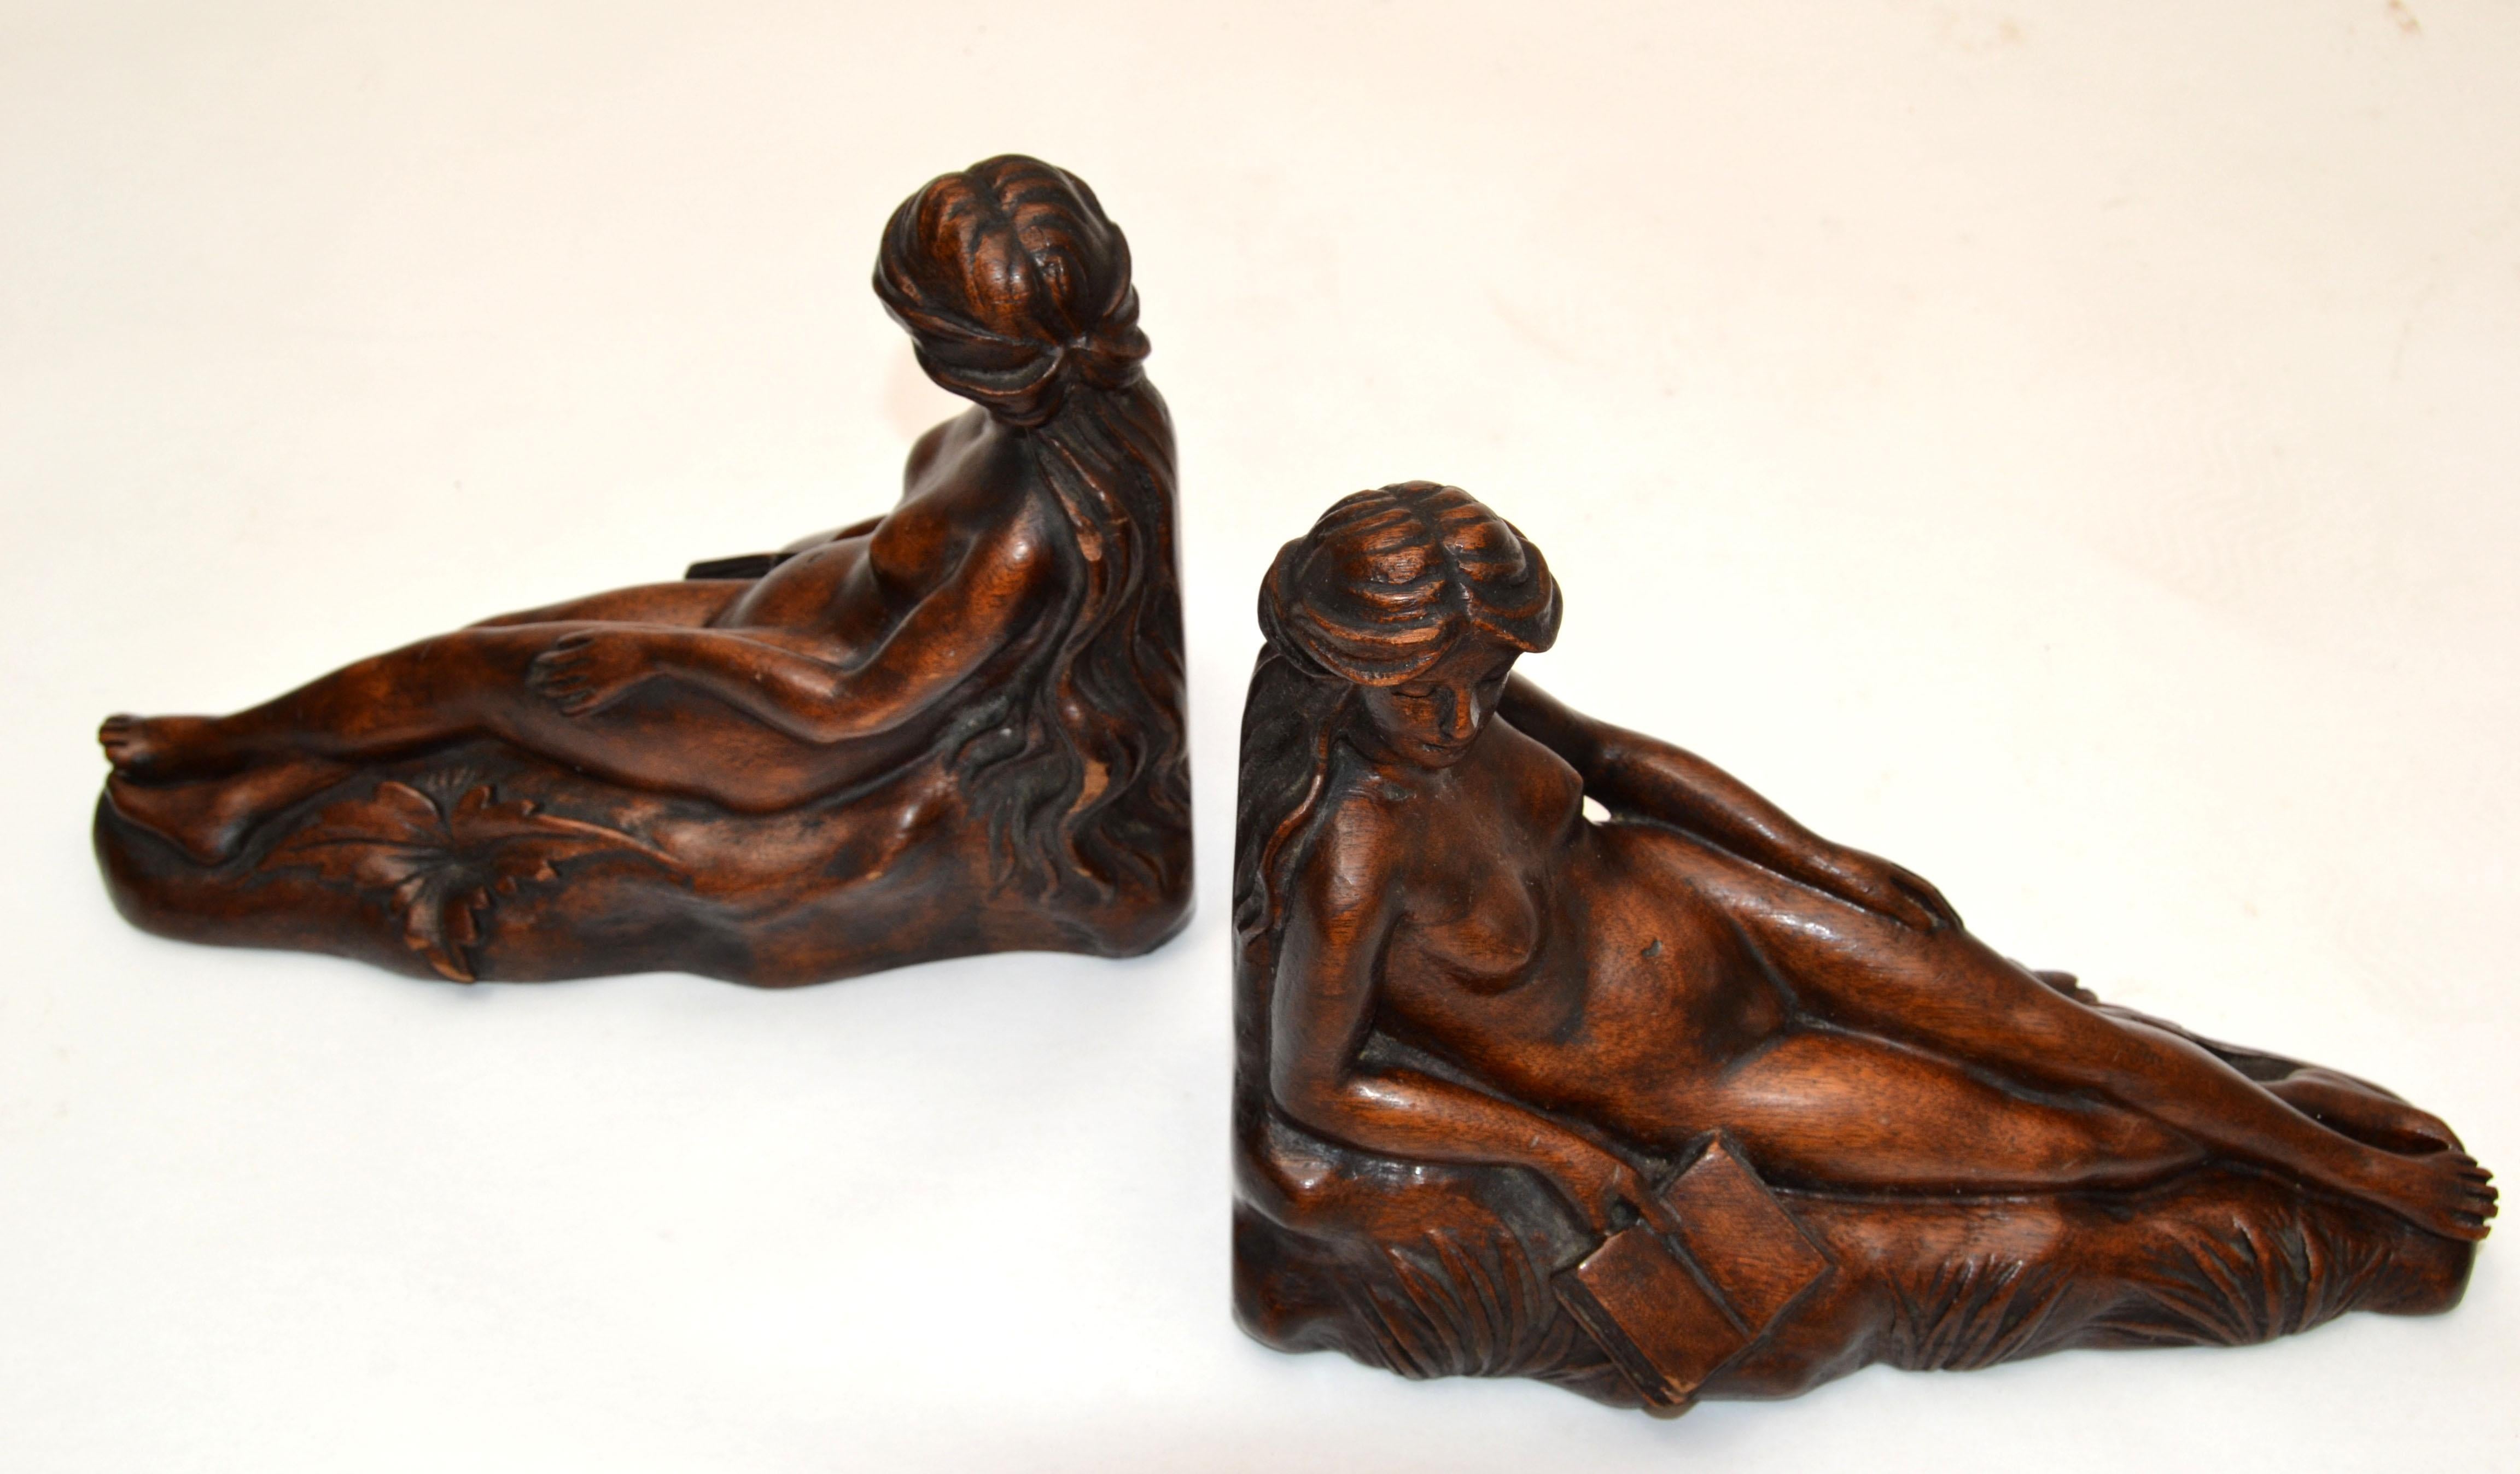 American Art Nouveau Hand Carved Oak Wood Bookends depicting Reading Female Nude 1940